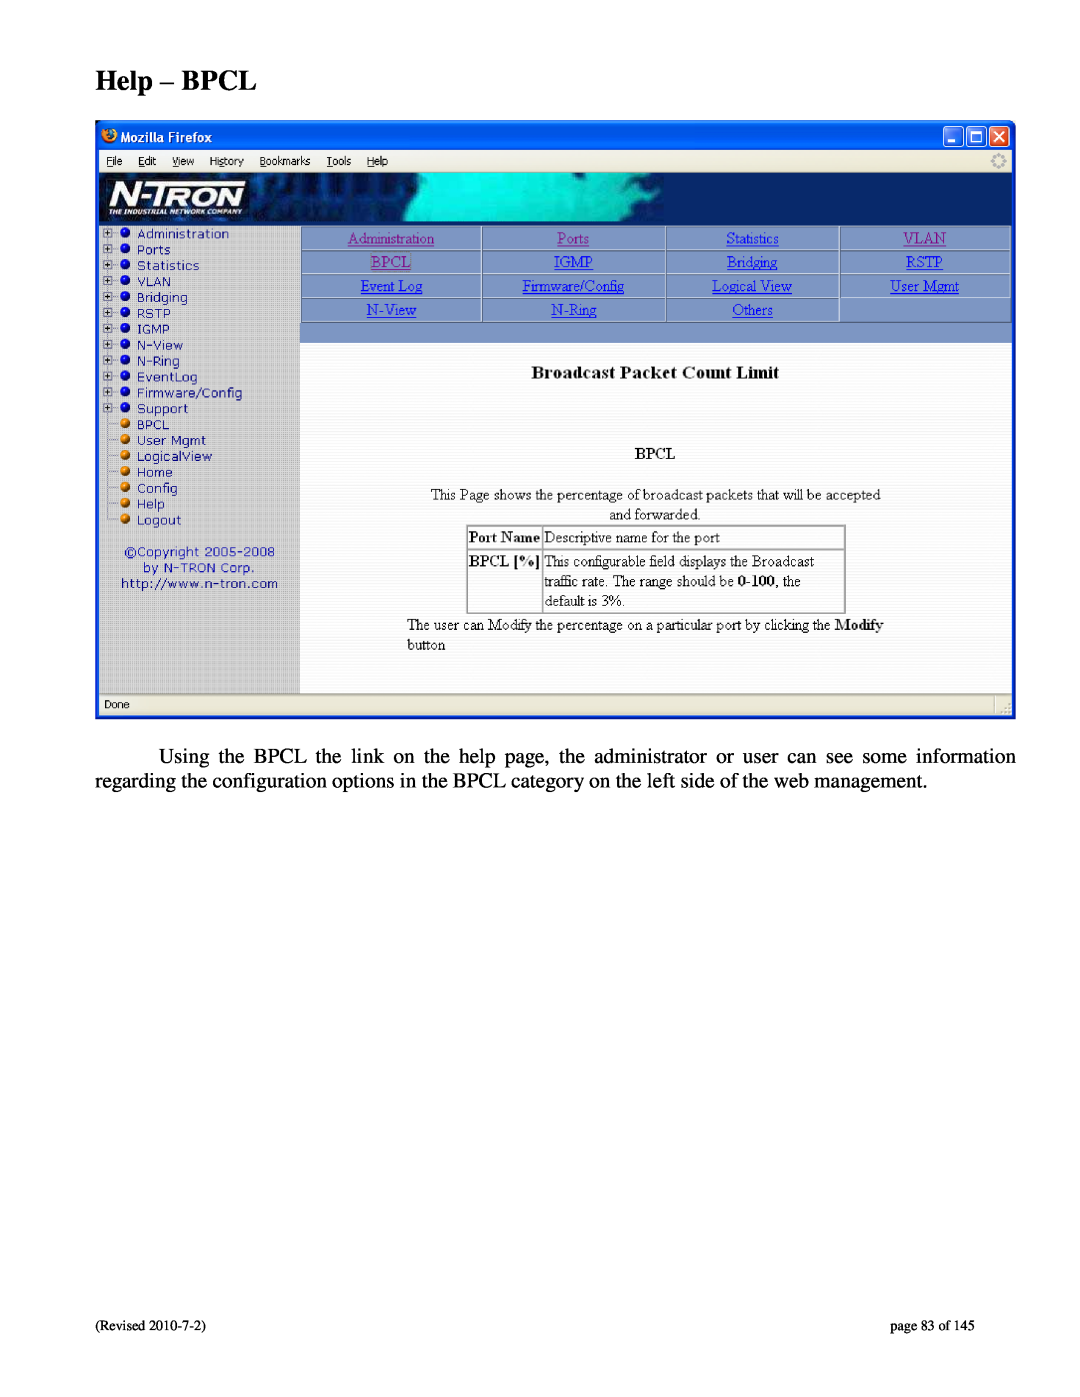 N-Tron 9000 user manual Help - BPCL, page 83 of 